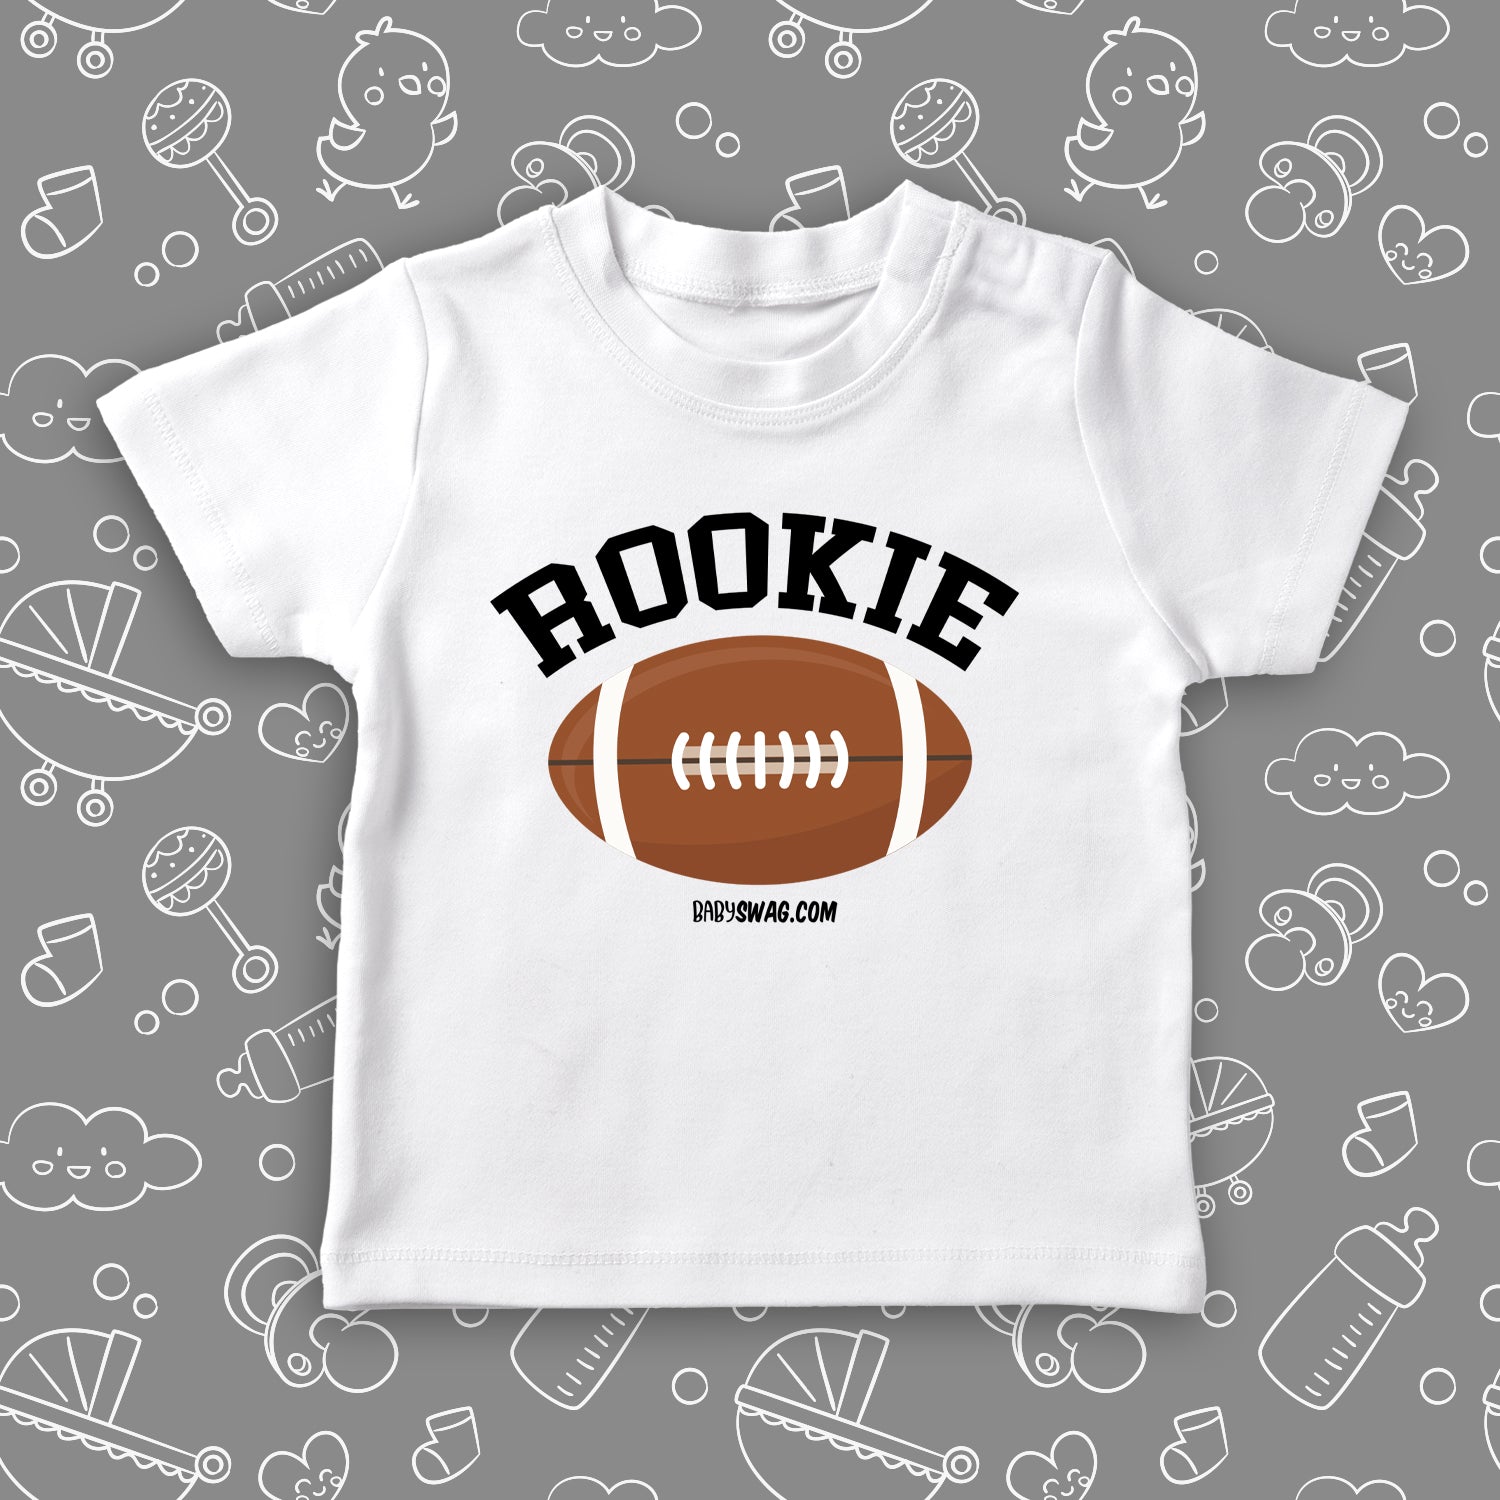 The "Rookie" toddler boy shirt in white. 